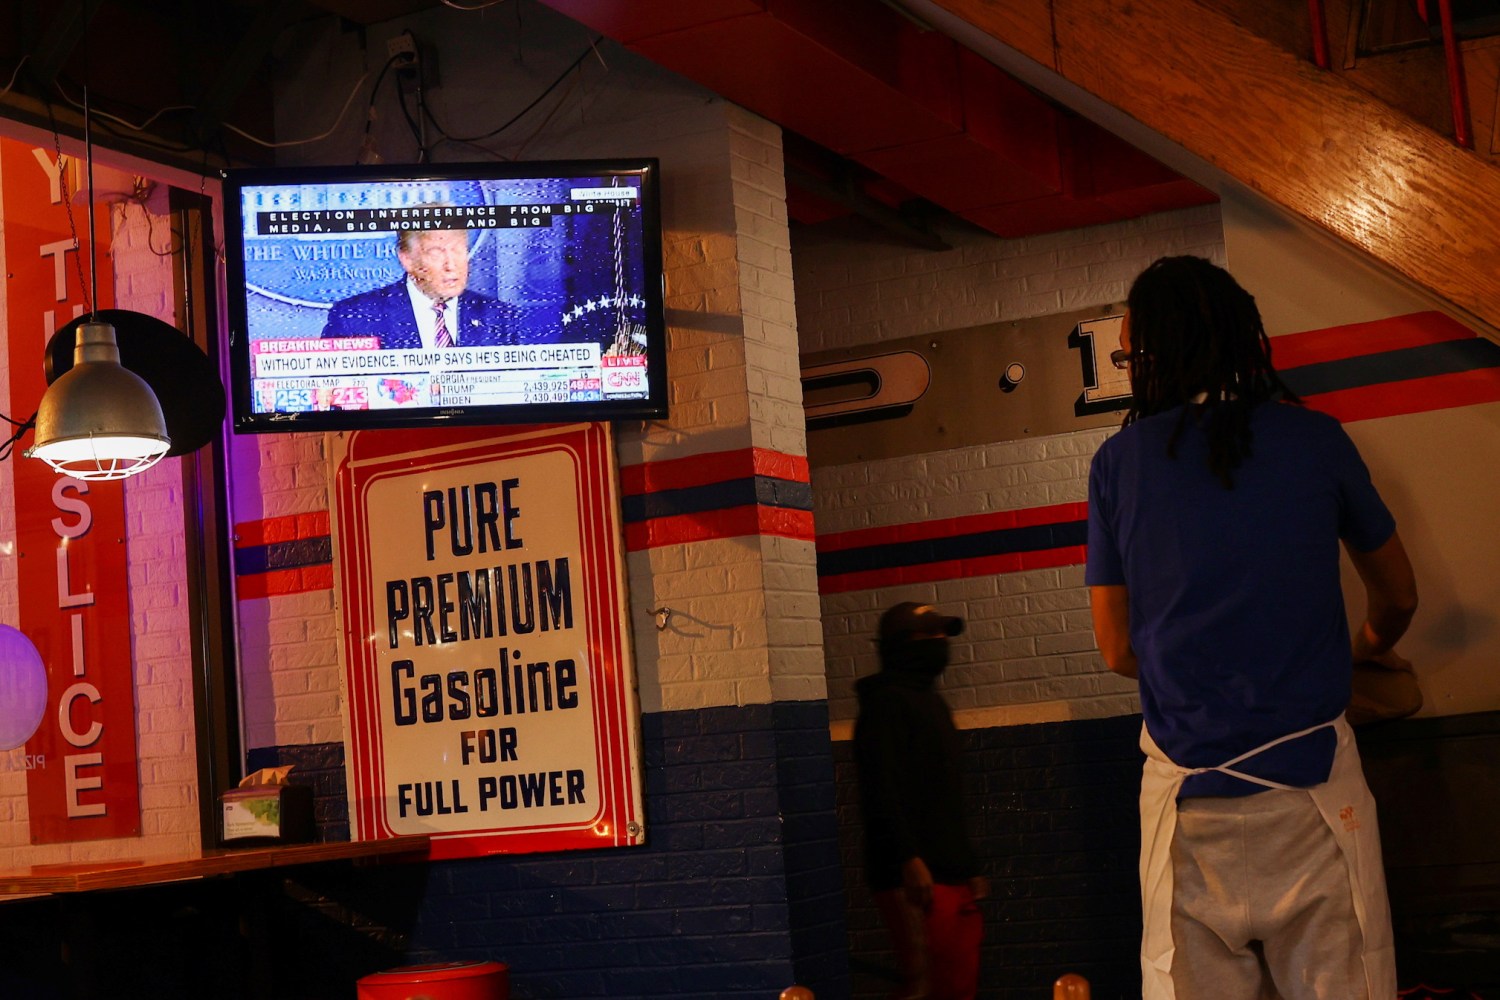 A TV screen at a restaurant shows U.S. President Donald Trump speaking after Election Day in Washington, D.C., U.S., November 5, 2020. REUTERS/Hannah McKay